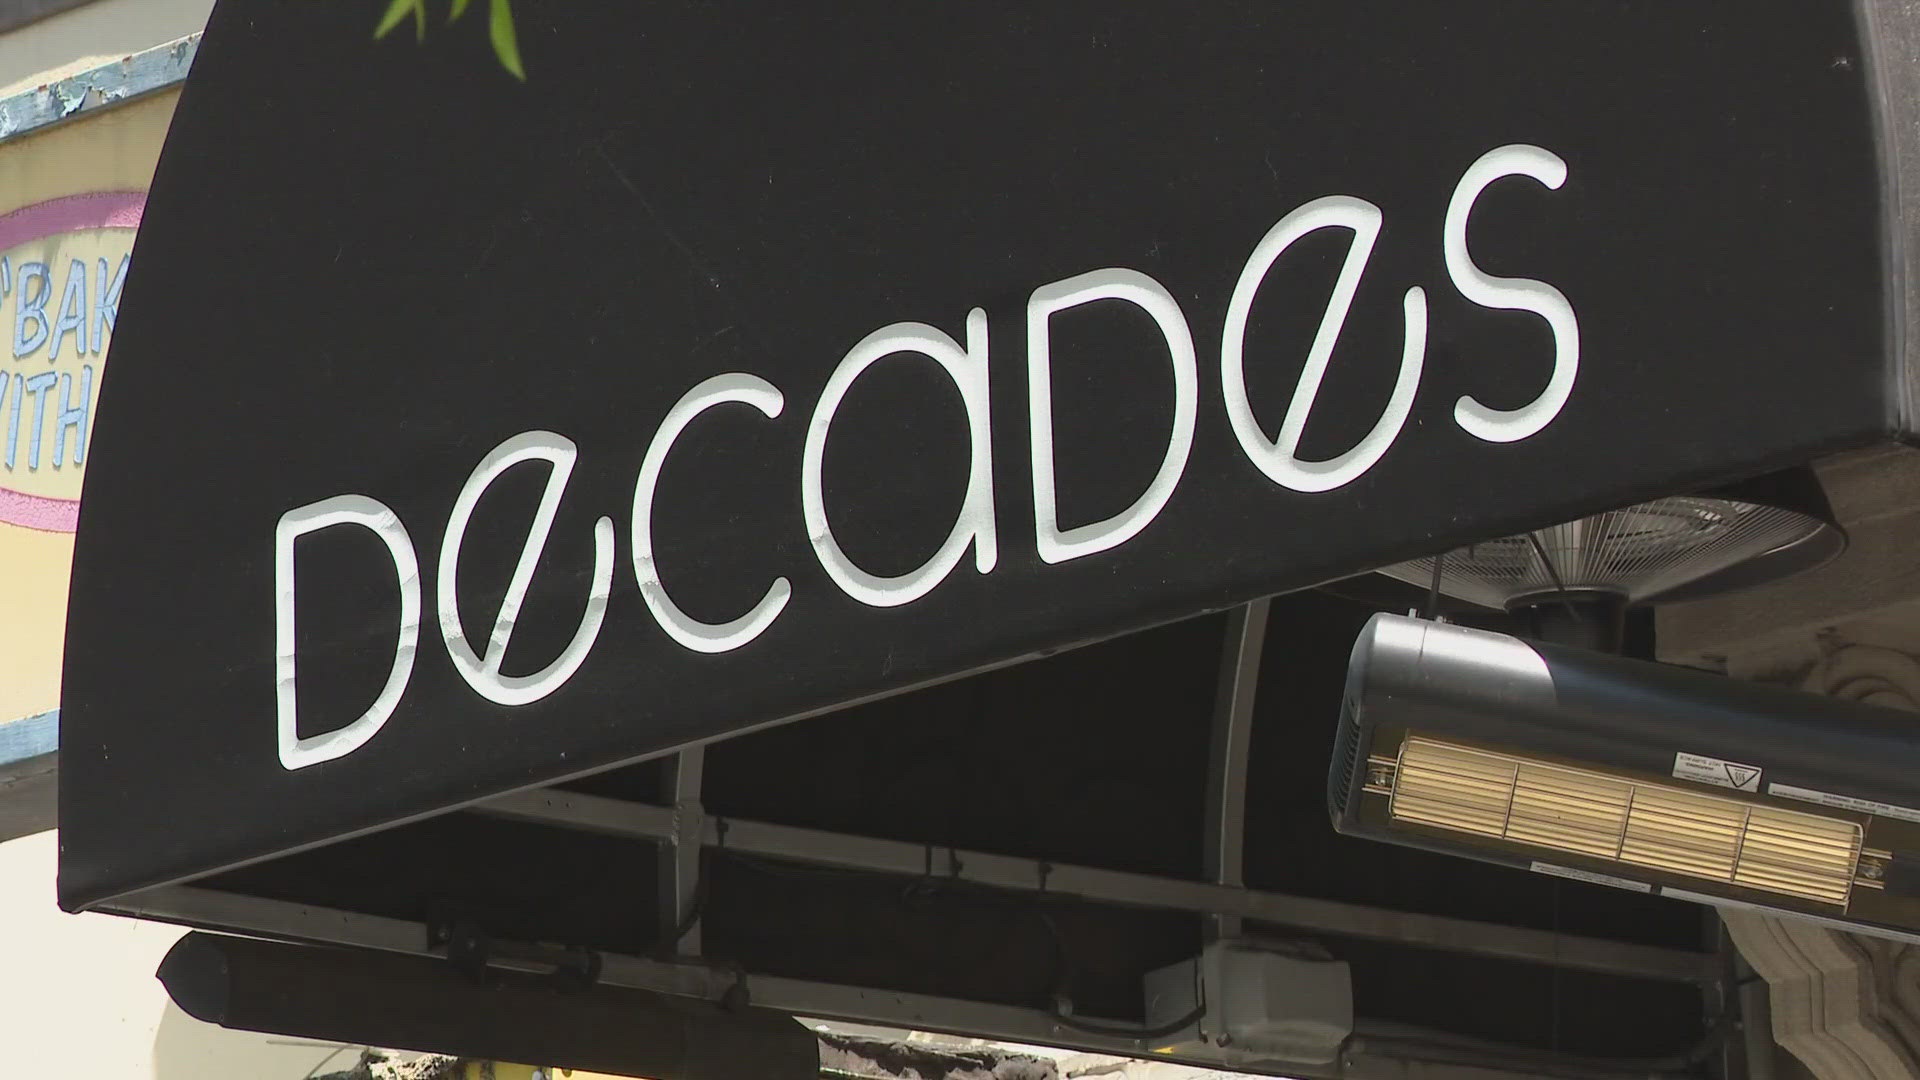 DC's Alcoholic Beverage and Cannabis Board has suspended the alcoholic beverage license for a club in Dupont Circle called Decades, where a mass shooting took place.